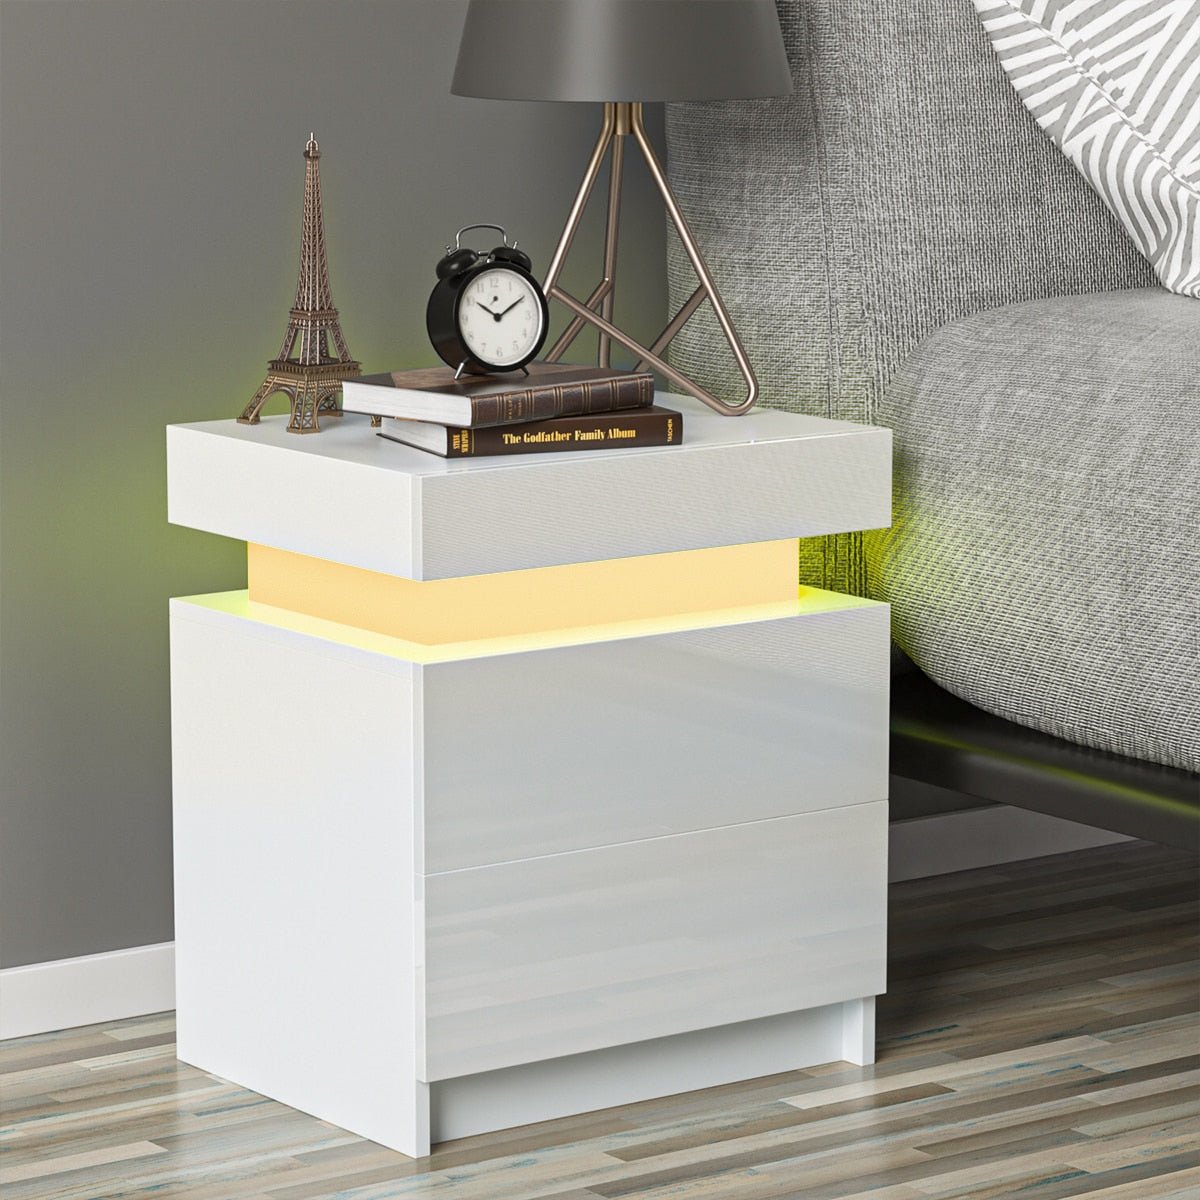 LED Bedside Nightstand And Drawer Storage Organizer